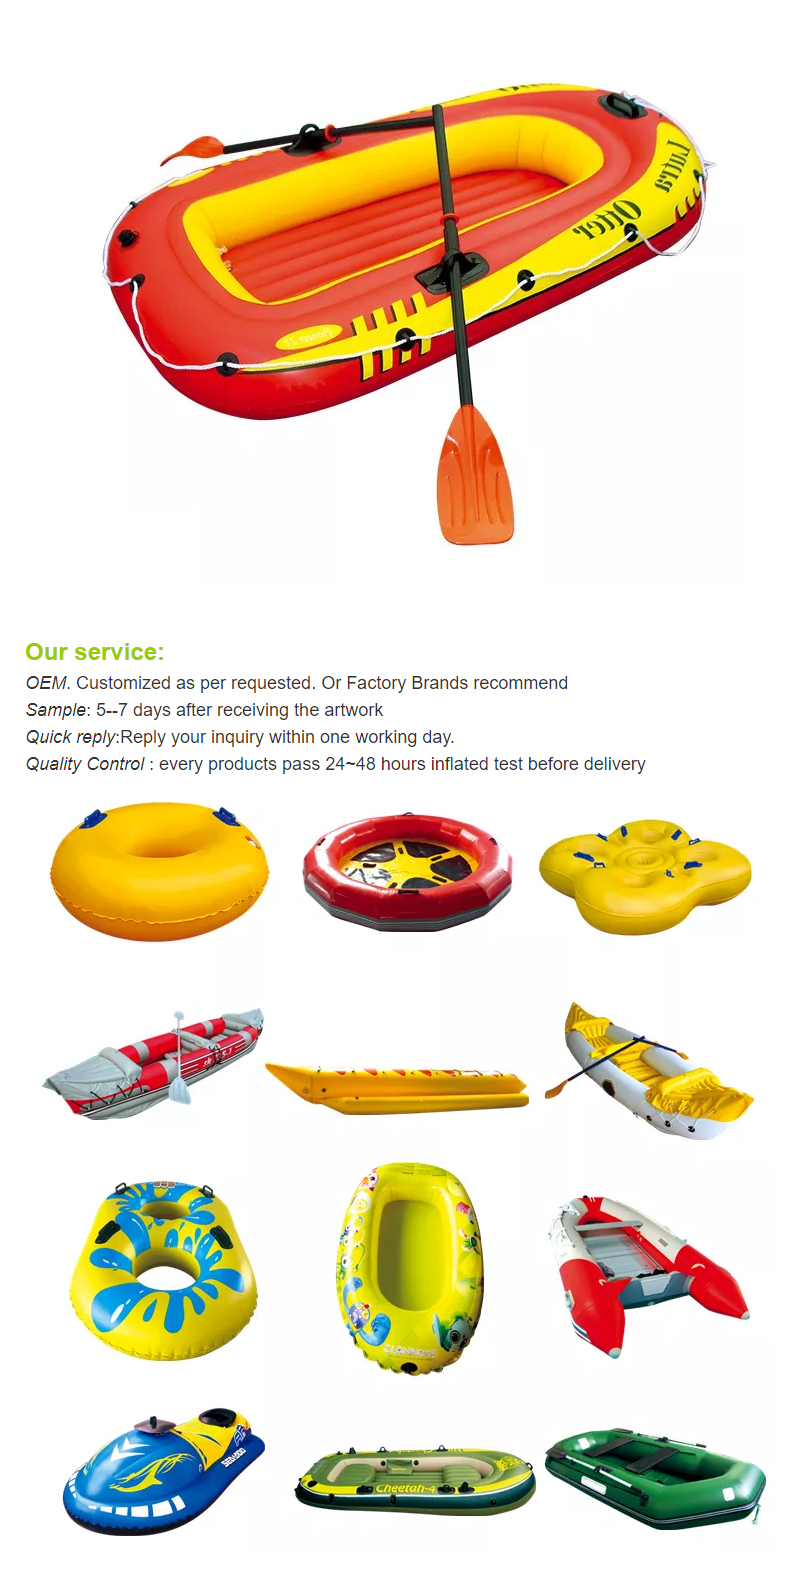 Inflatable Rowing Boat Premium Quality Fishing Kayak Dinghy_01